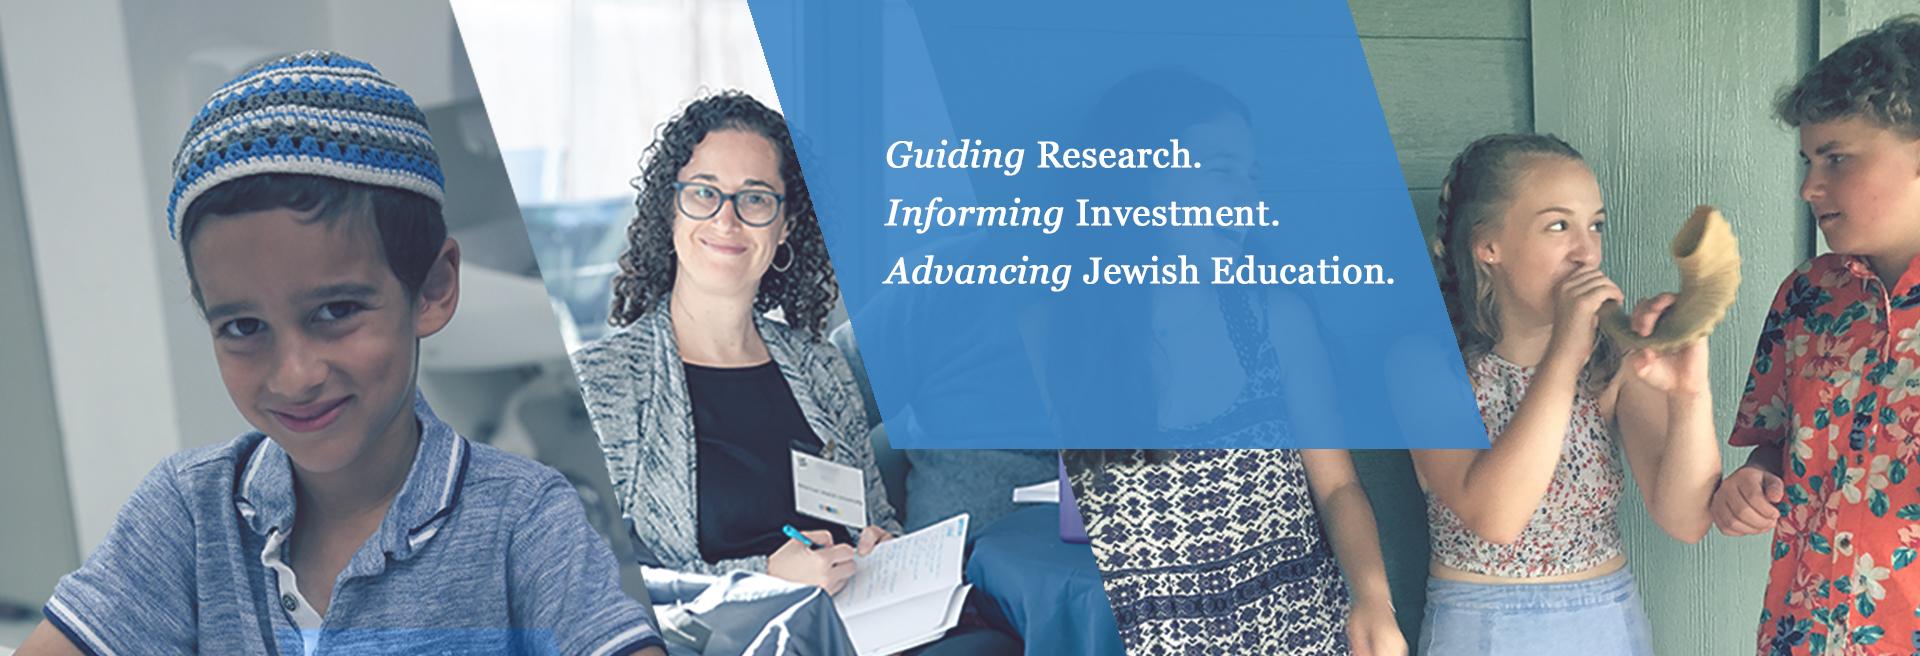 Decorative header that includes three photos. The first photo is a young child with a kippah. The second is of Jewish professionals. The third is of three teens, one is blowing a shofar. A blue background behind text reads "Guiding Research. Informing Investment. Advancing Jewish Education."